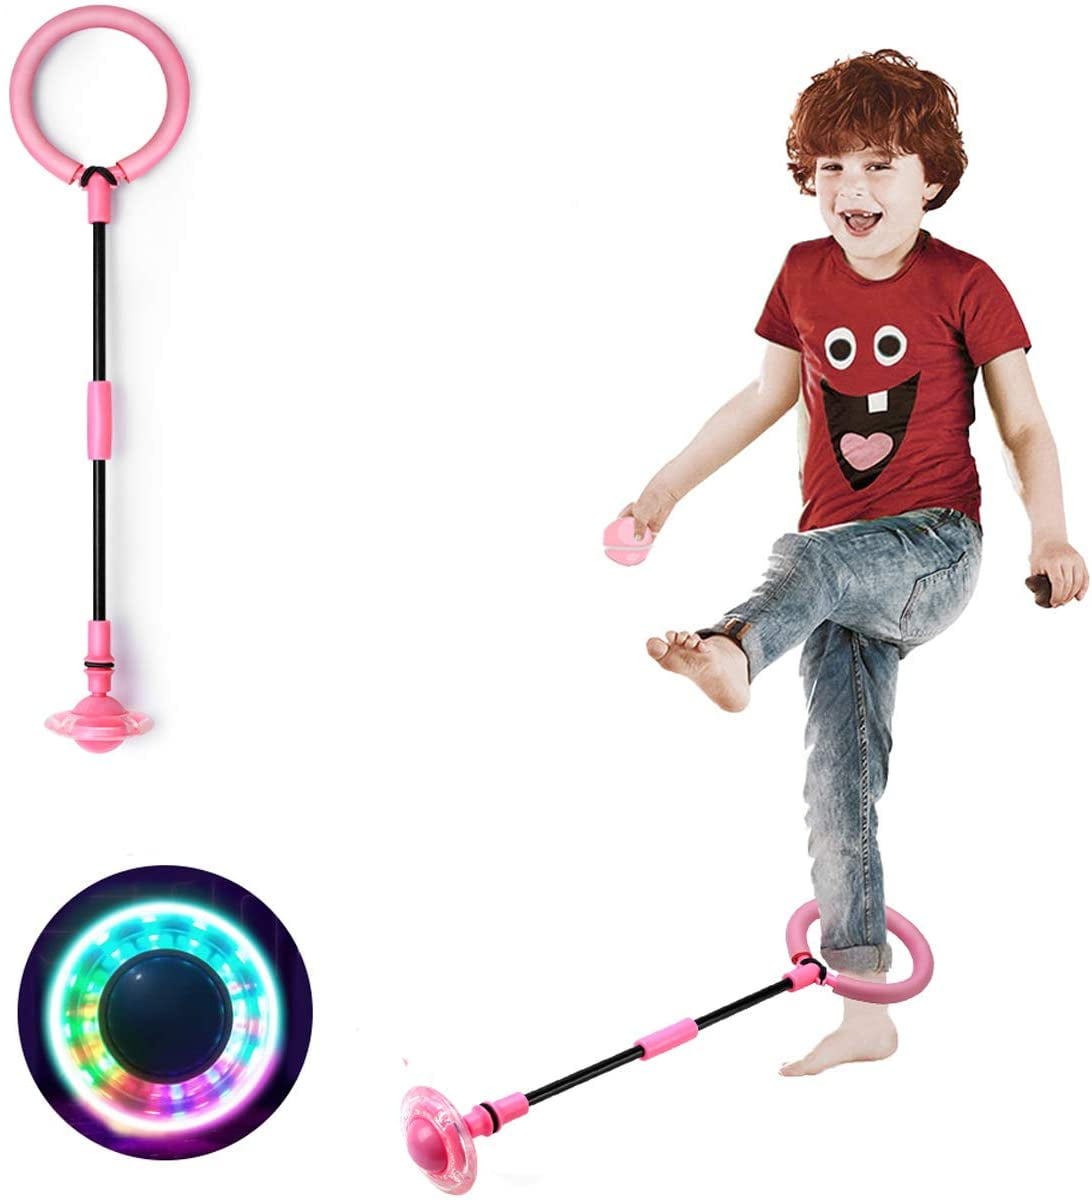 Details about   Rainmae Skip Ball Jumping Toy Swing Balls Fun Exercise Games Fitness Equipment, 